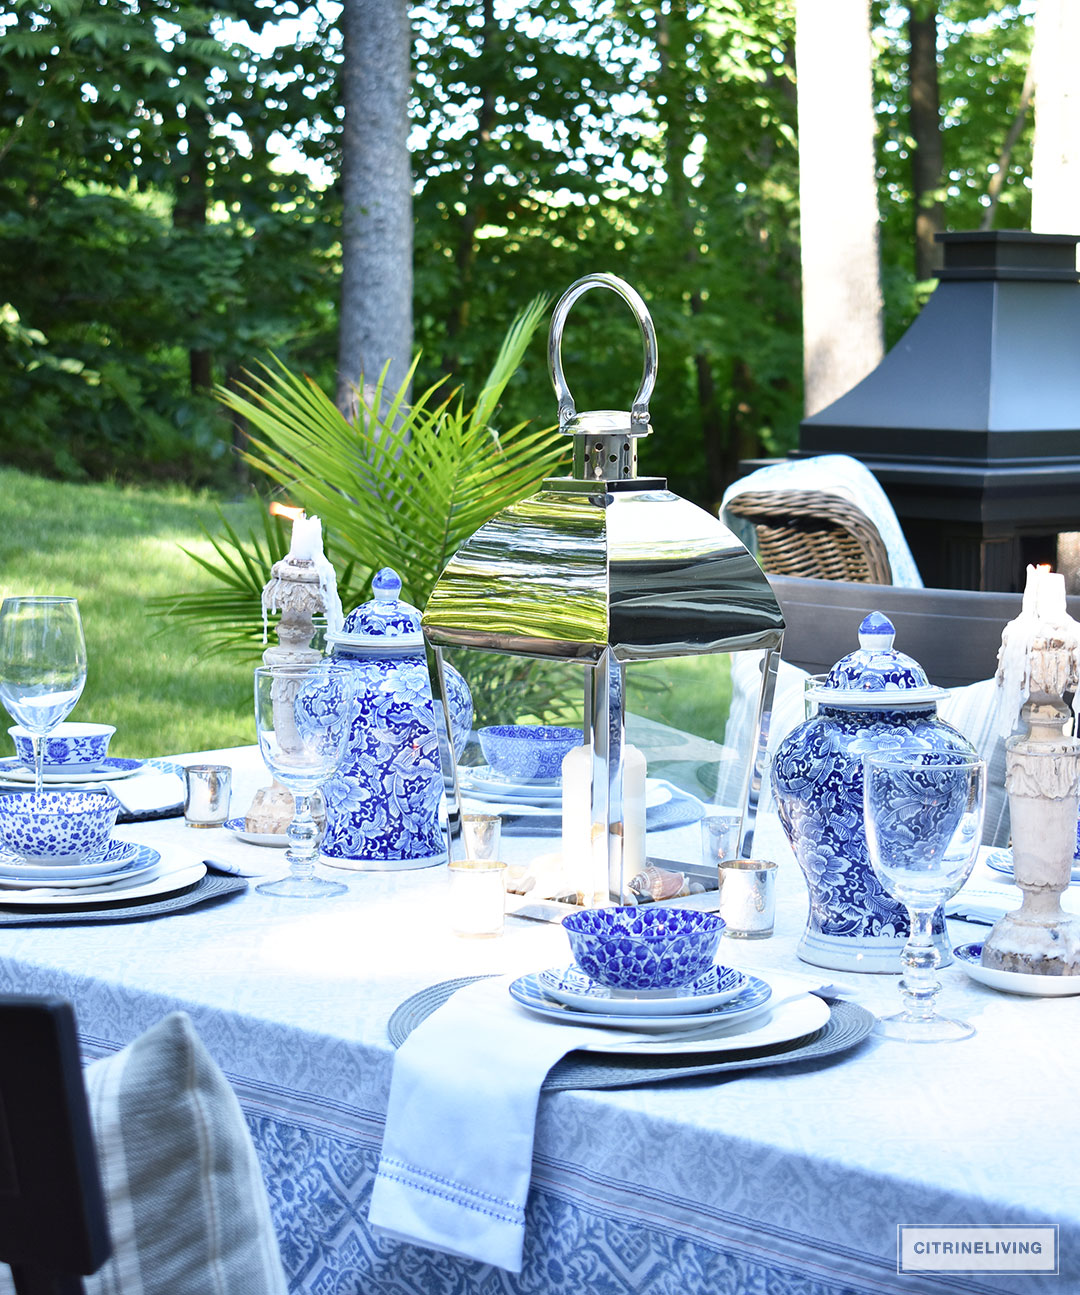 An outdoor tablescape with blue and white ginger jars and a mix of blue and white patterned dishes brings a casual yet elegant look to your outdoor space.